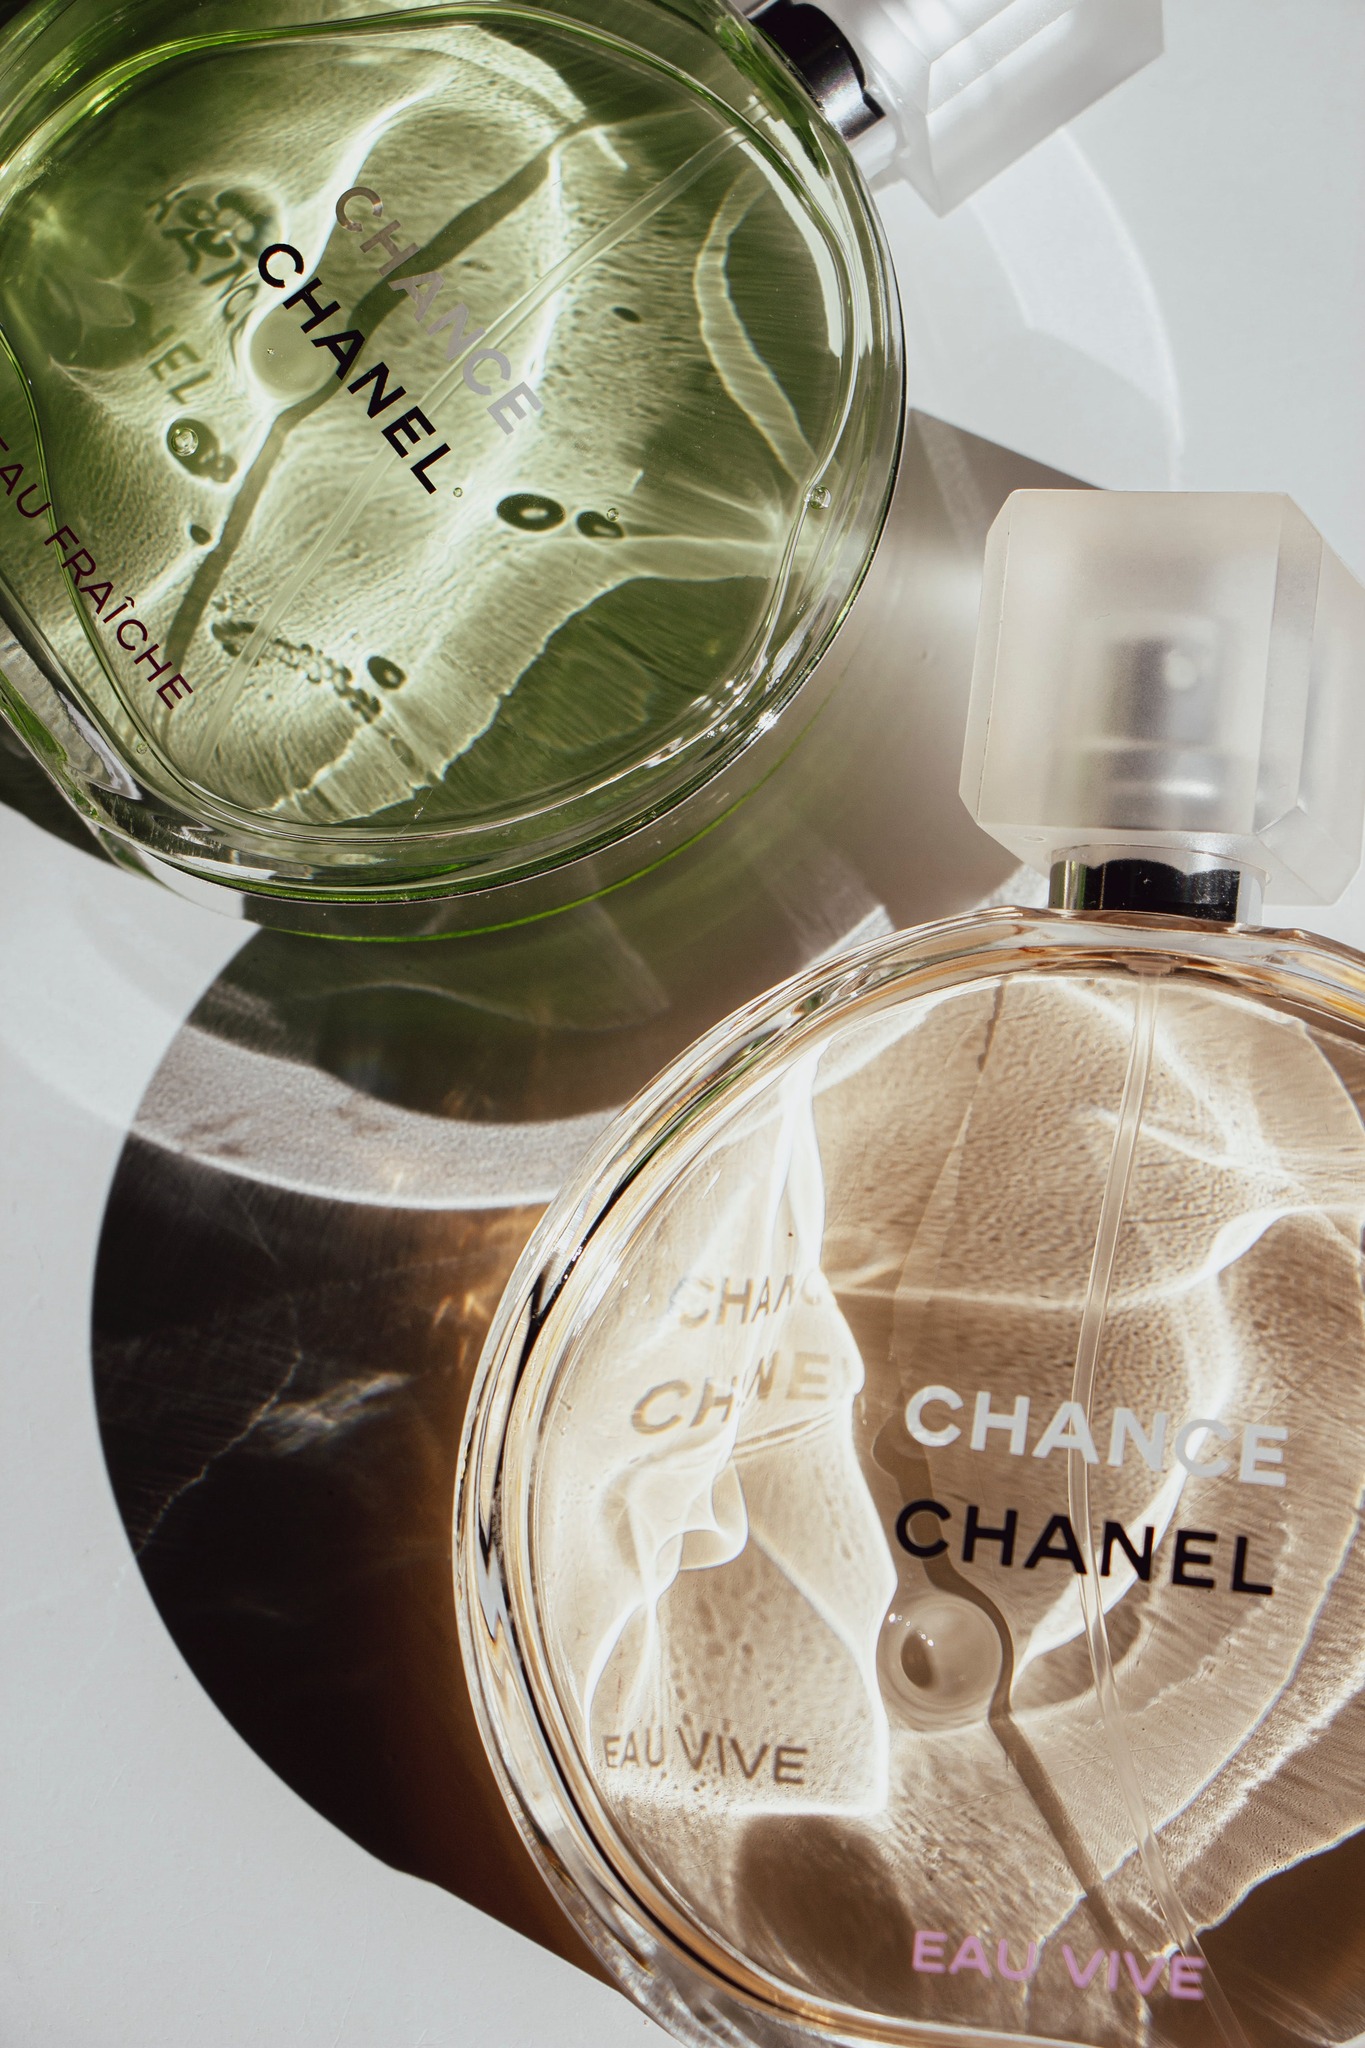 Bottles of Chanel perfume laying flat with light filtering through them